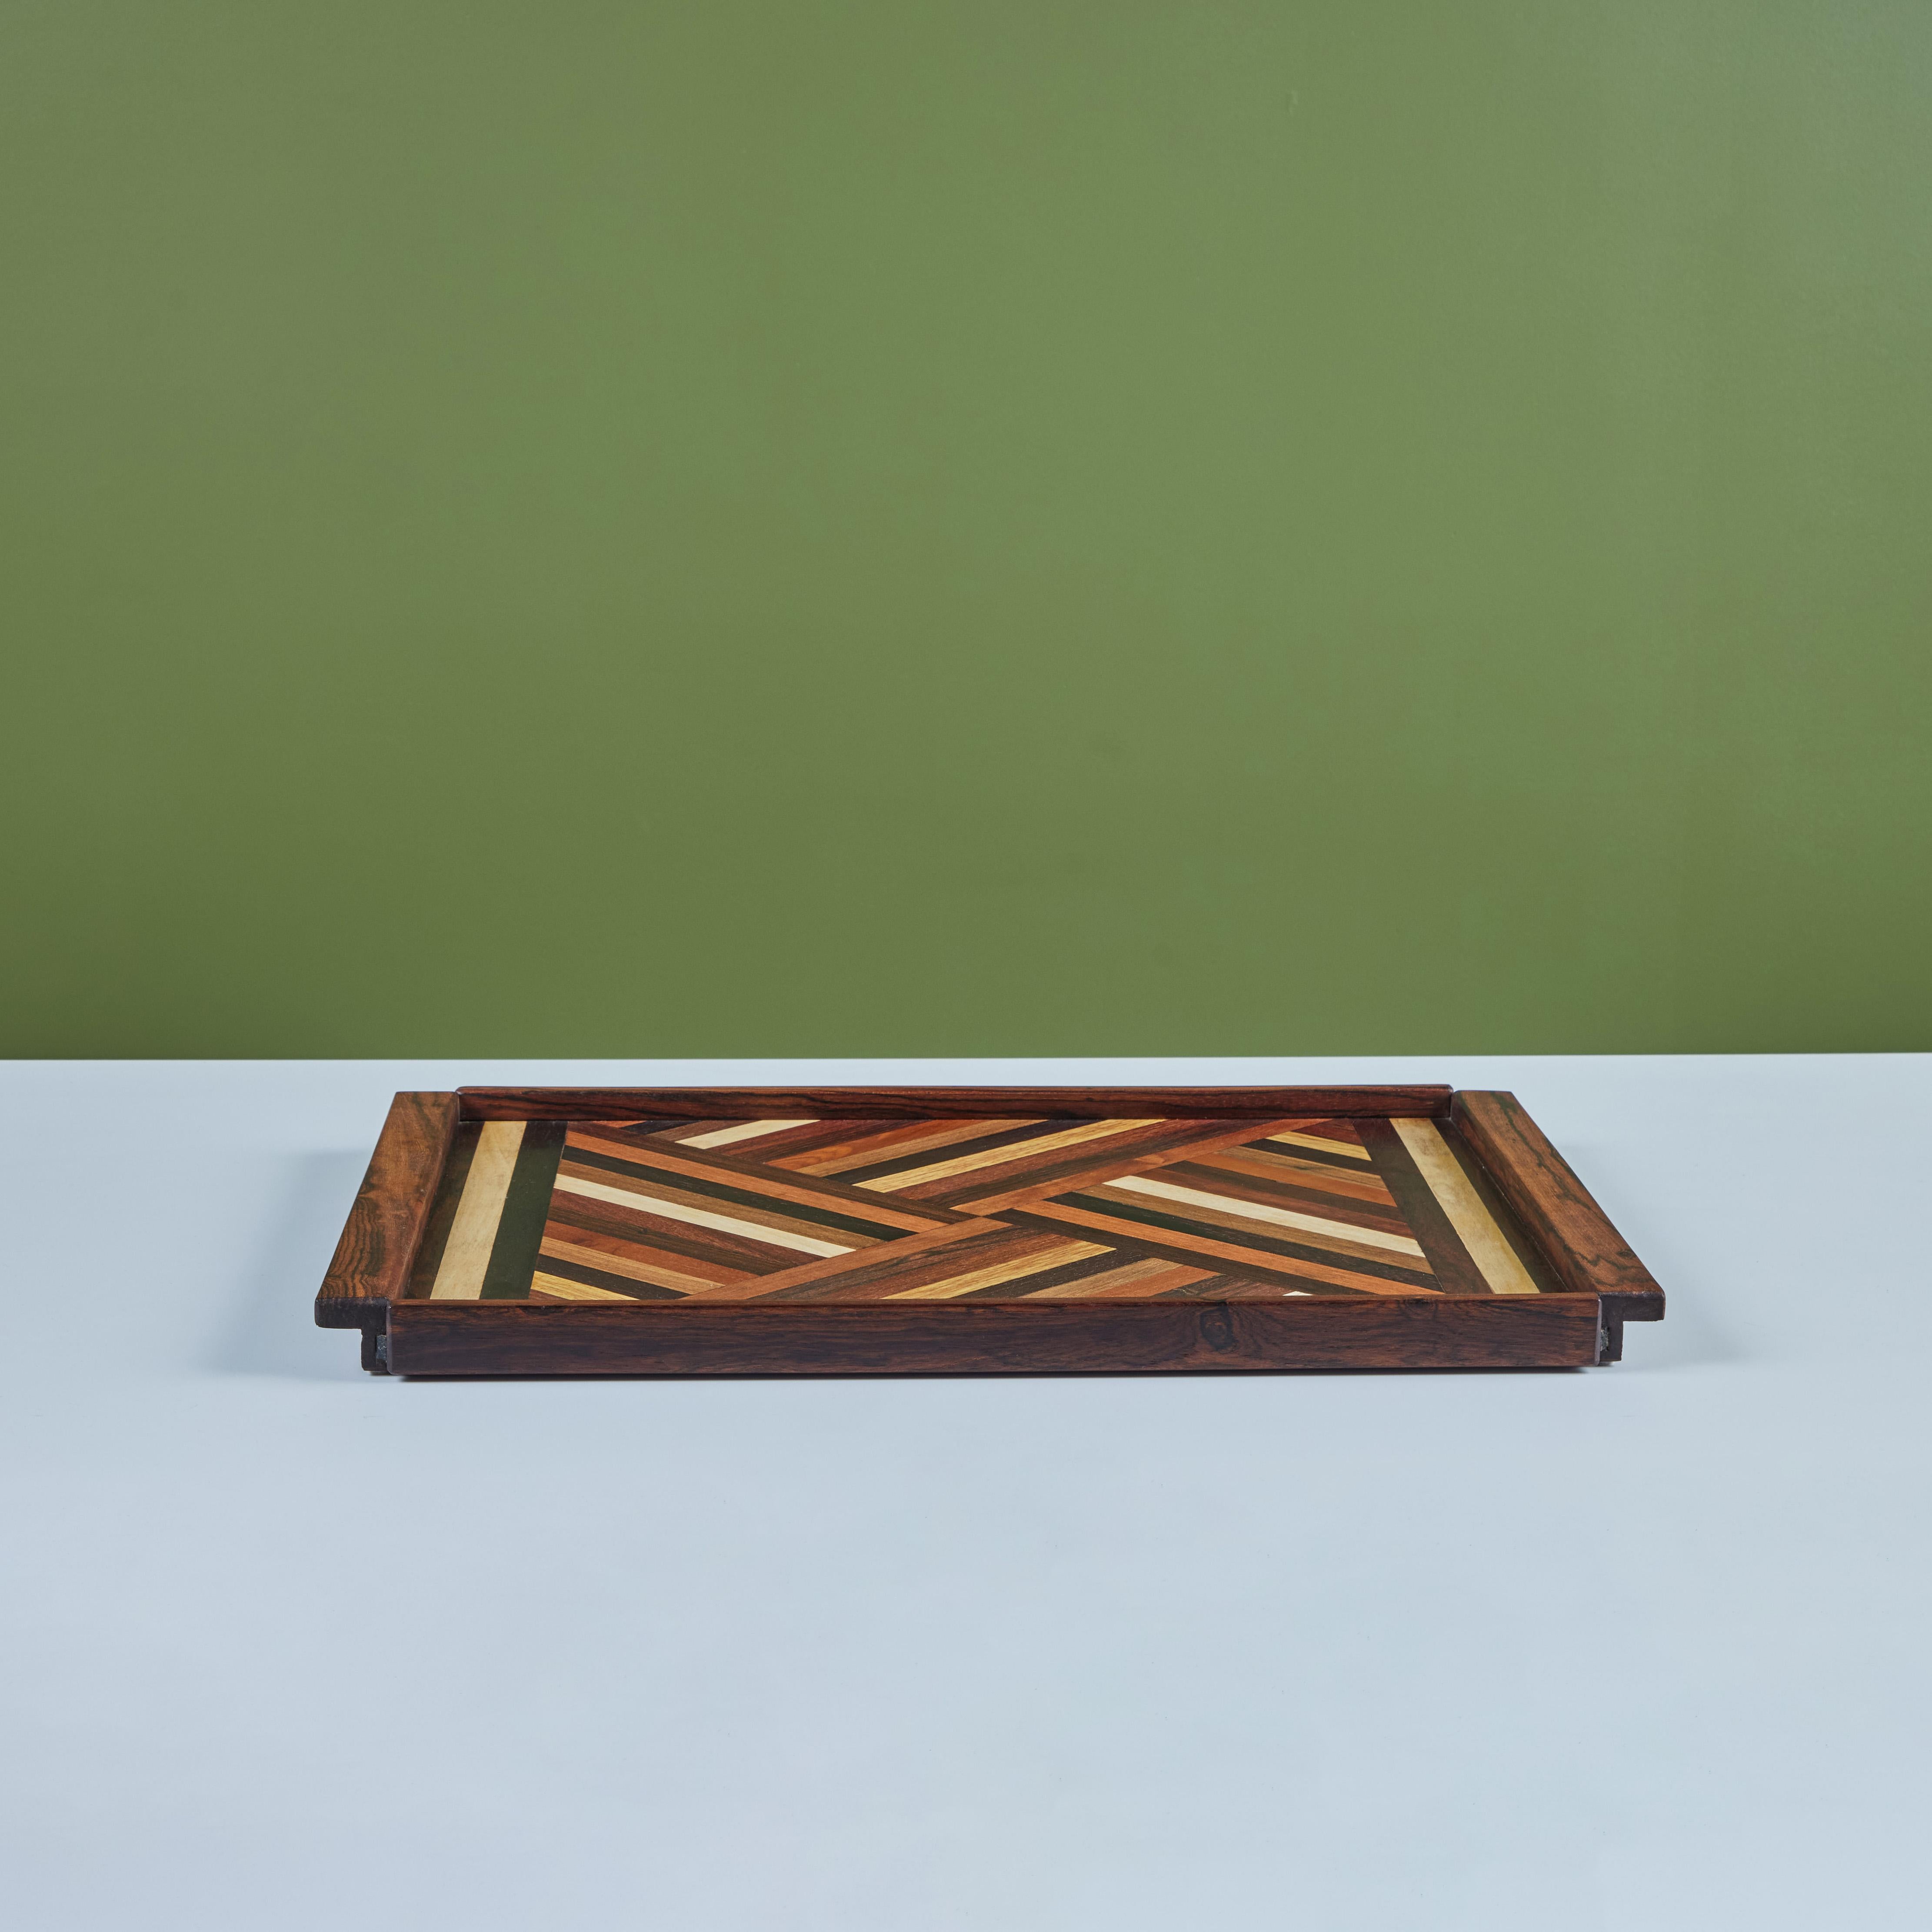 Inlay Don Shoemaker for Señal Geometric Marquetry Decorative Tray